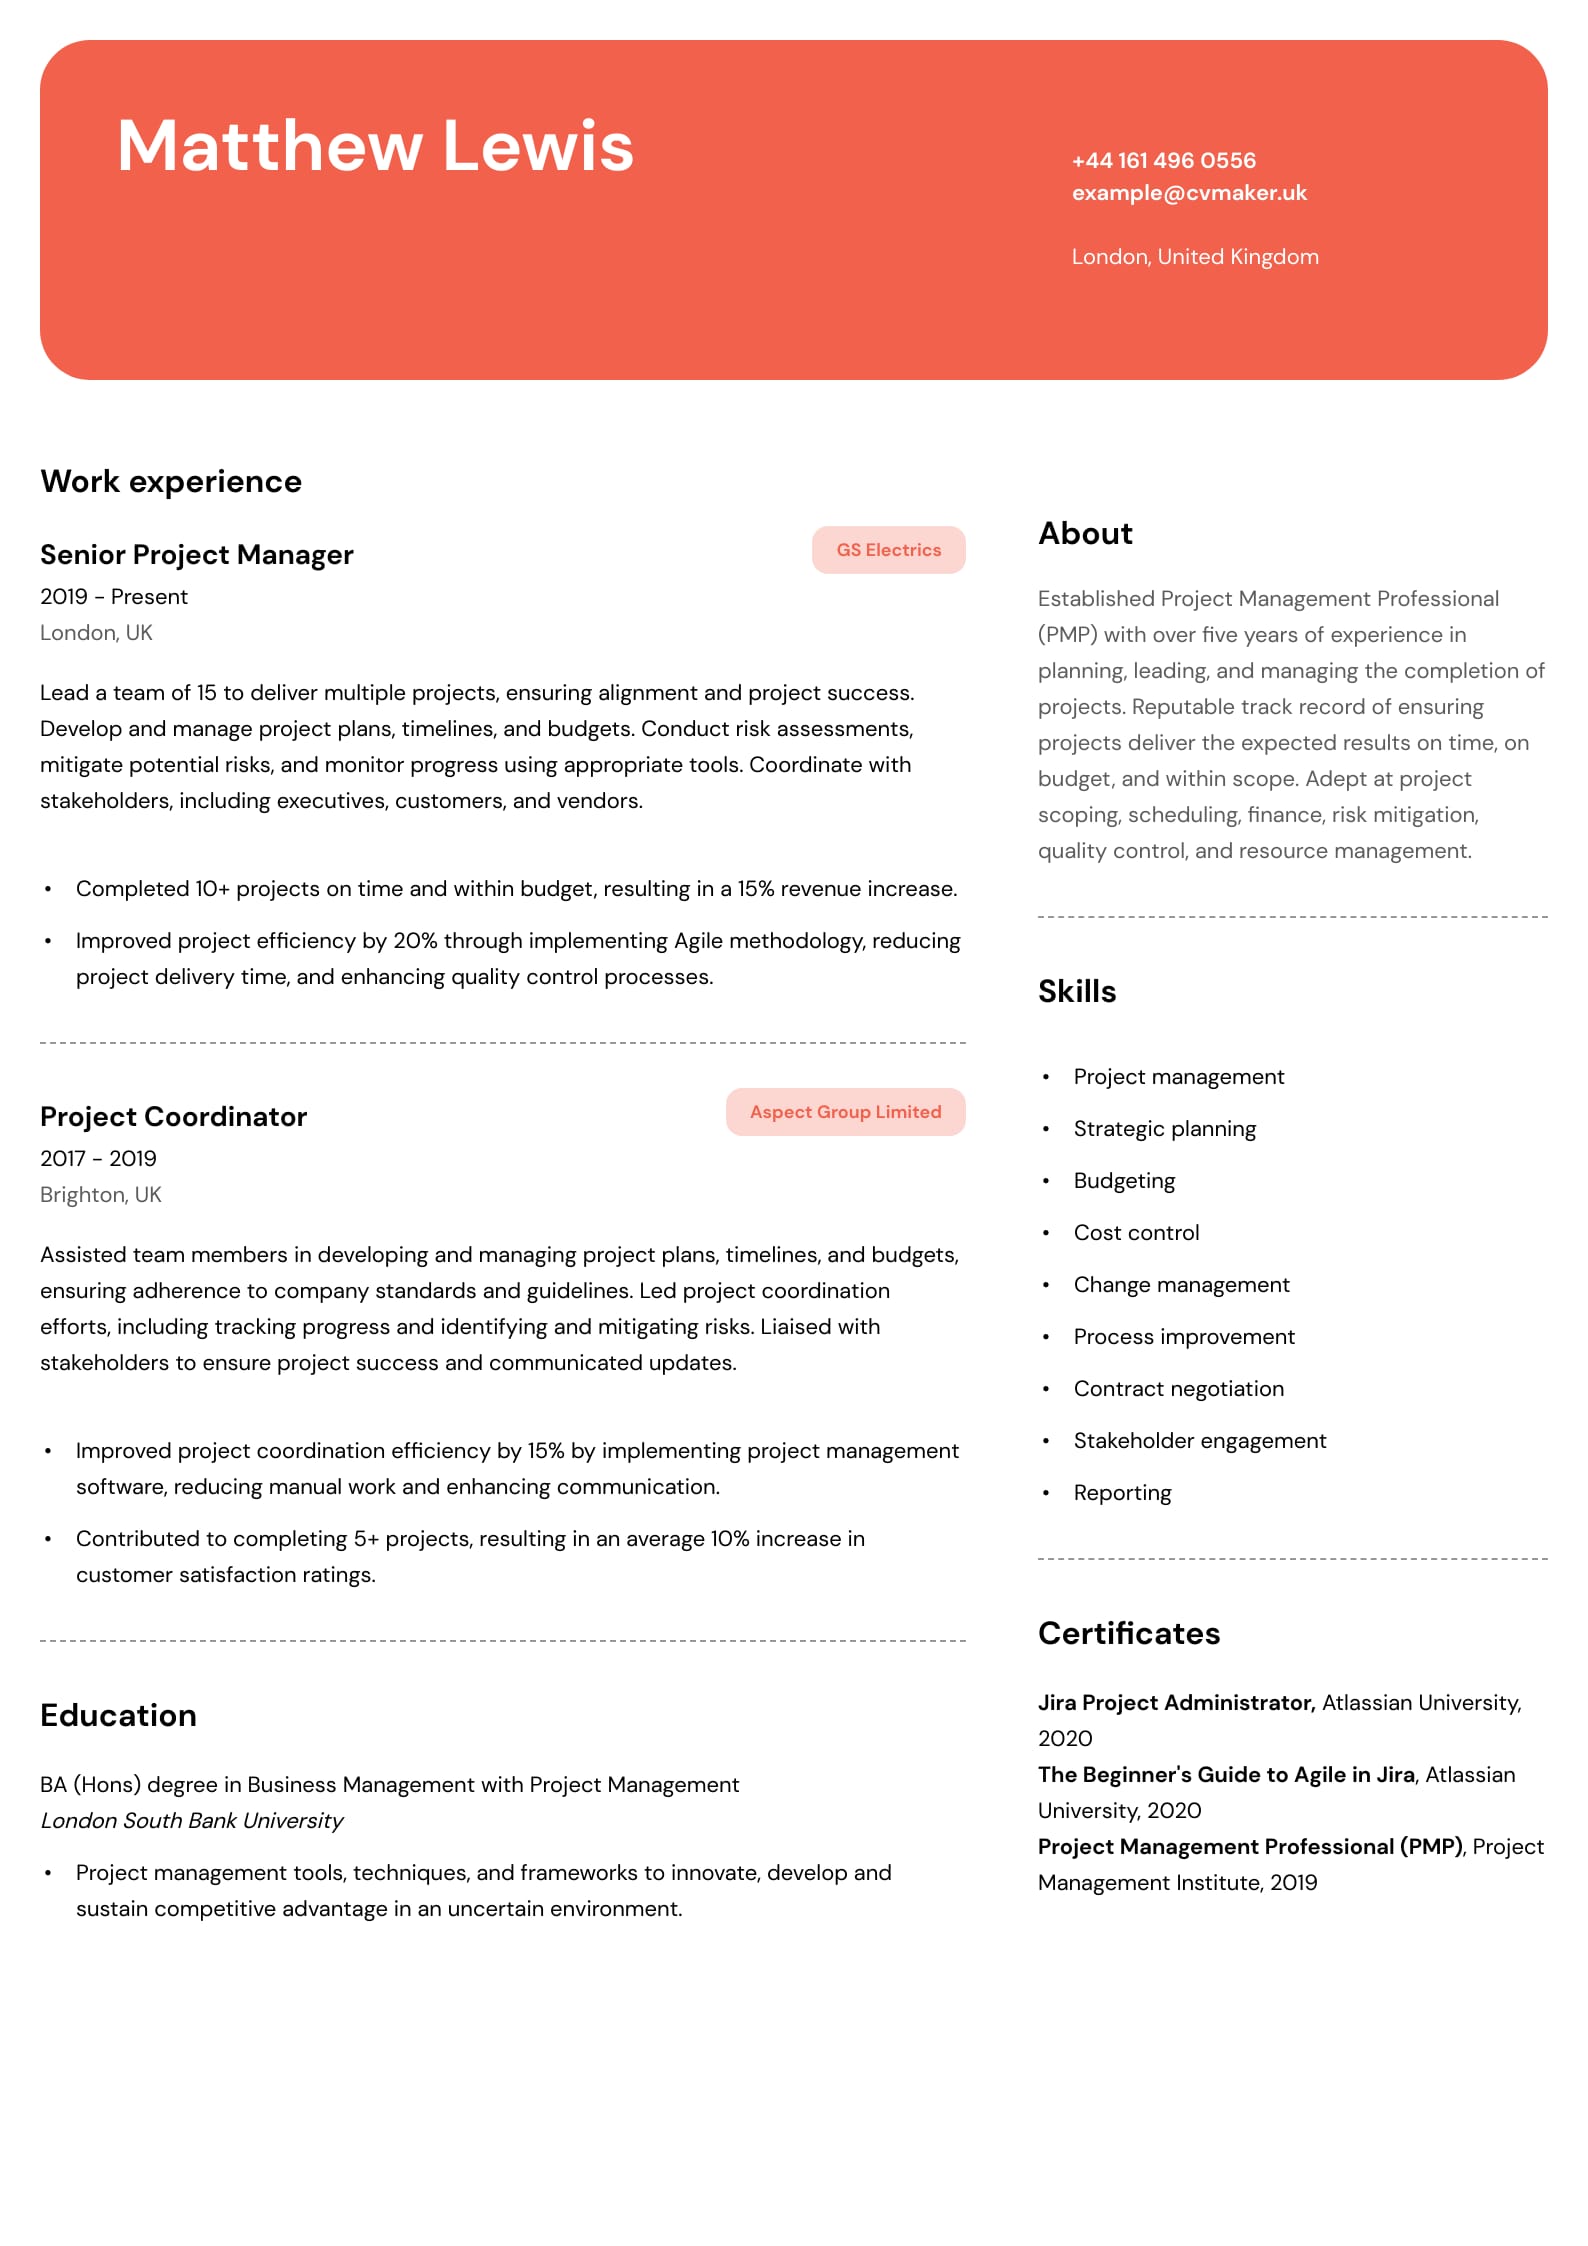 Project Manager CV example